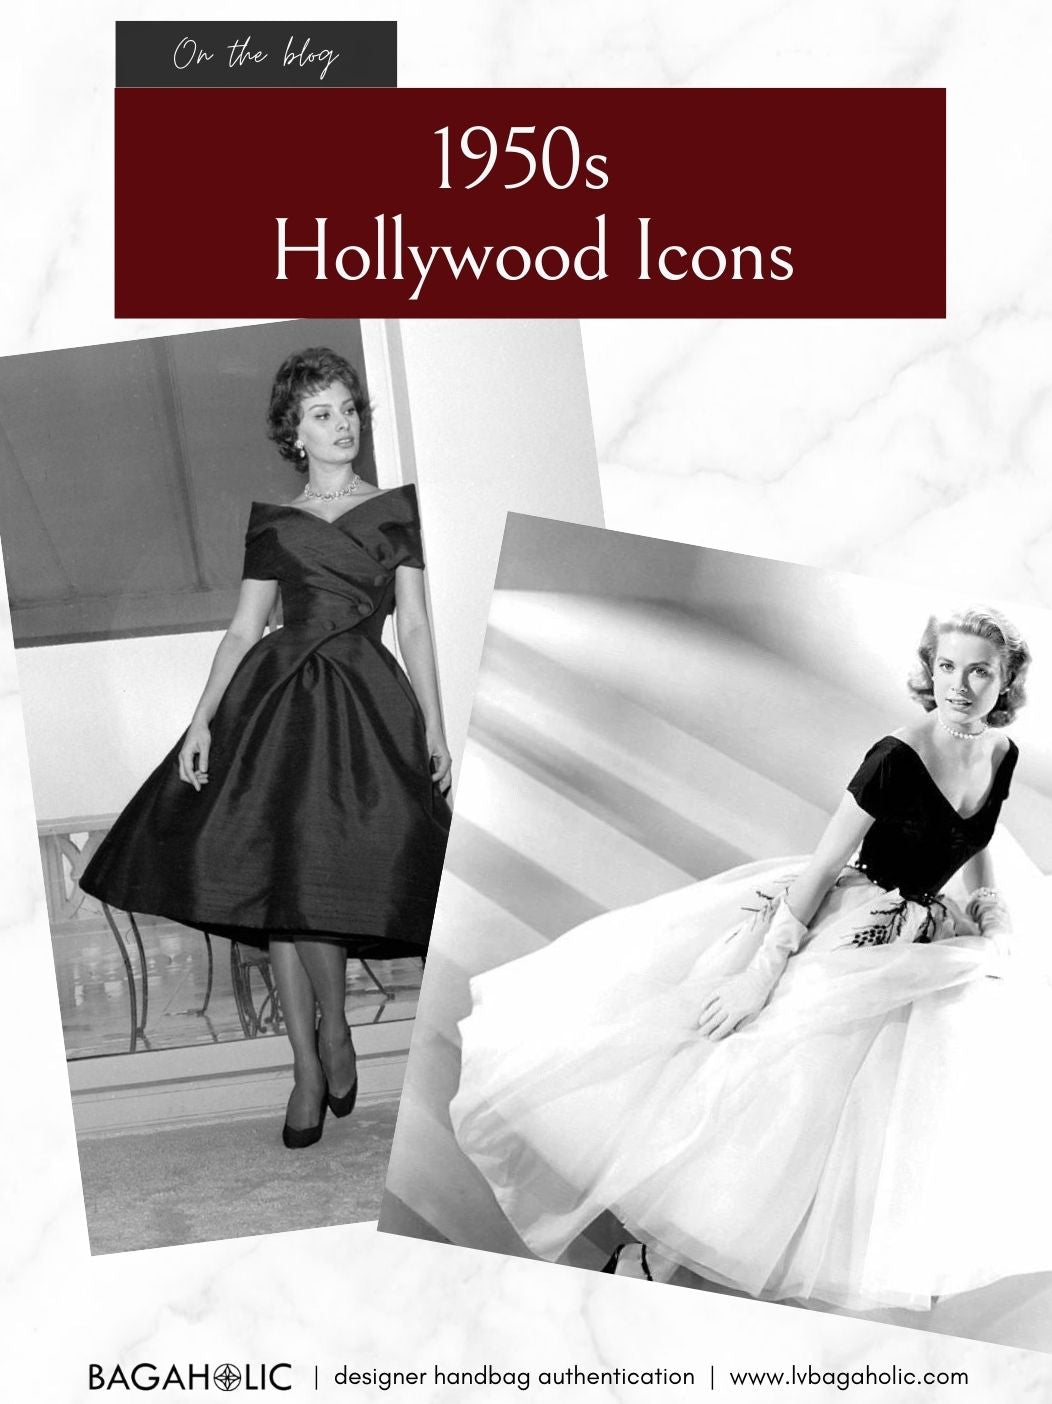 1950s actresses style and outfits